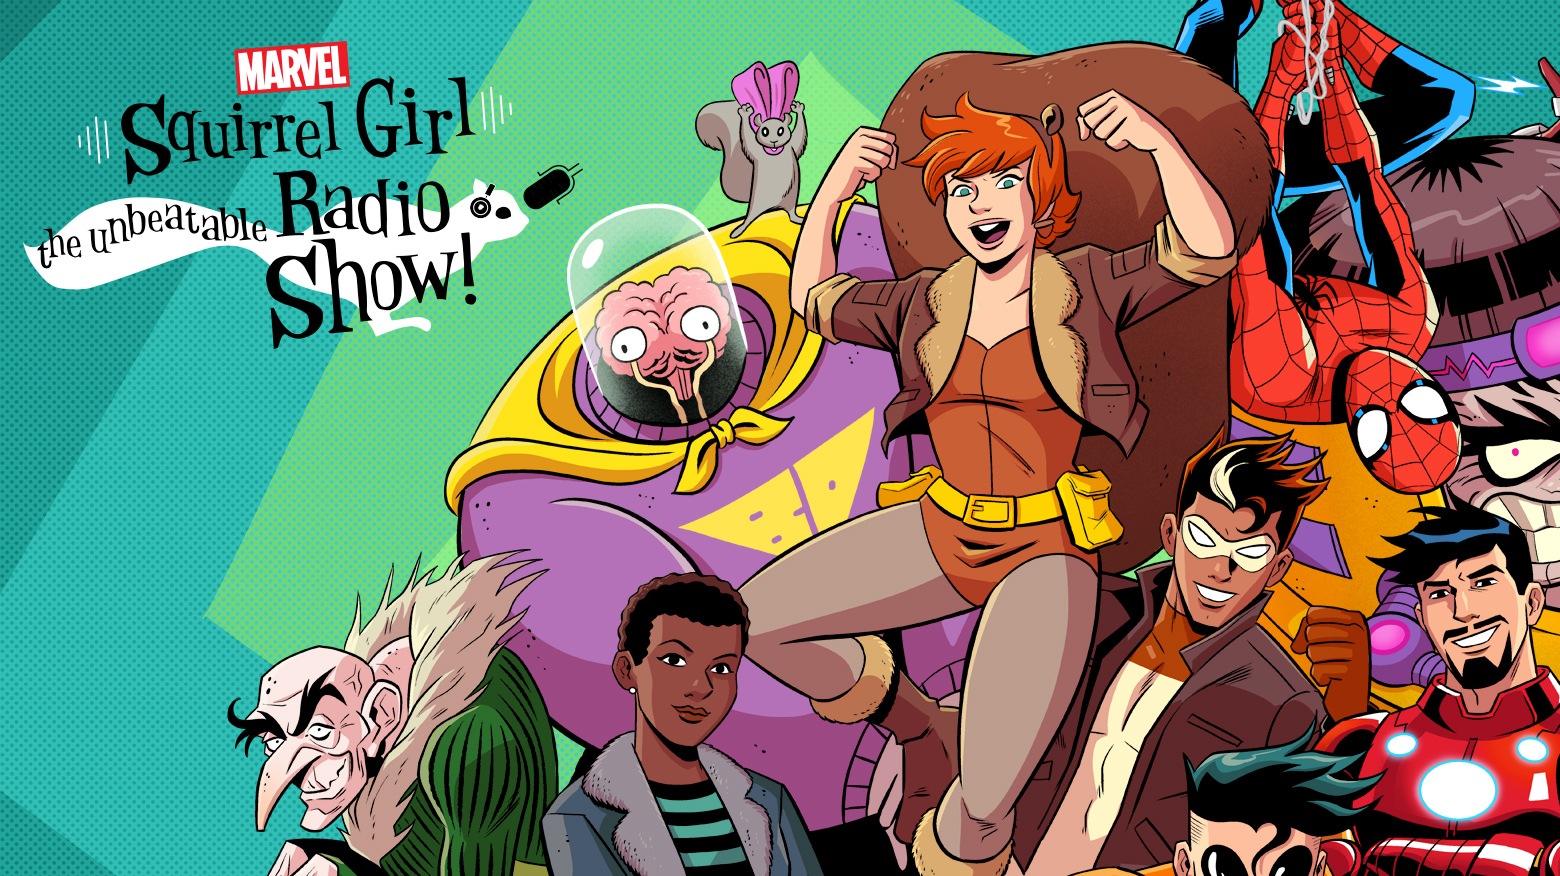 Squirrel Girl podcast